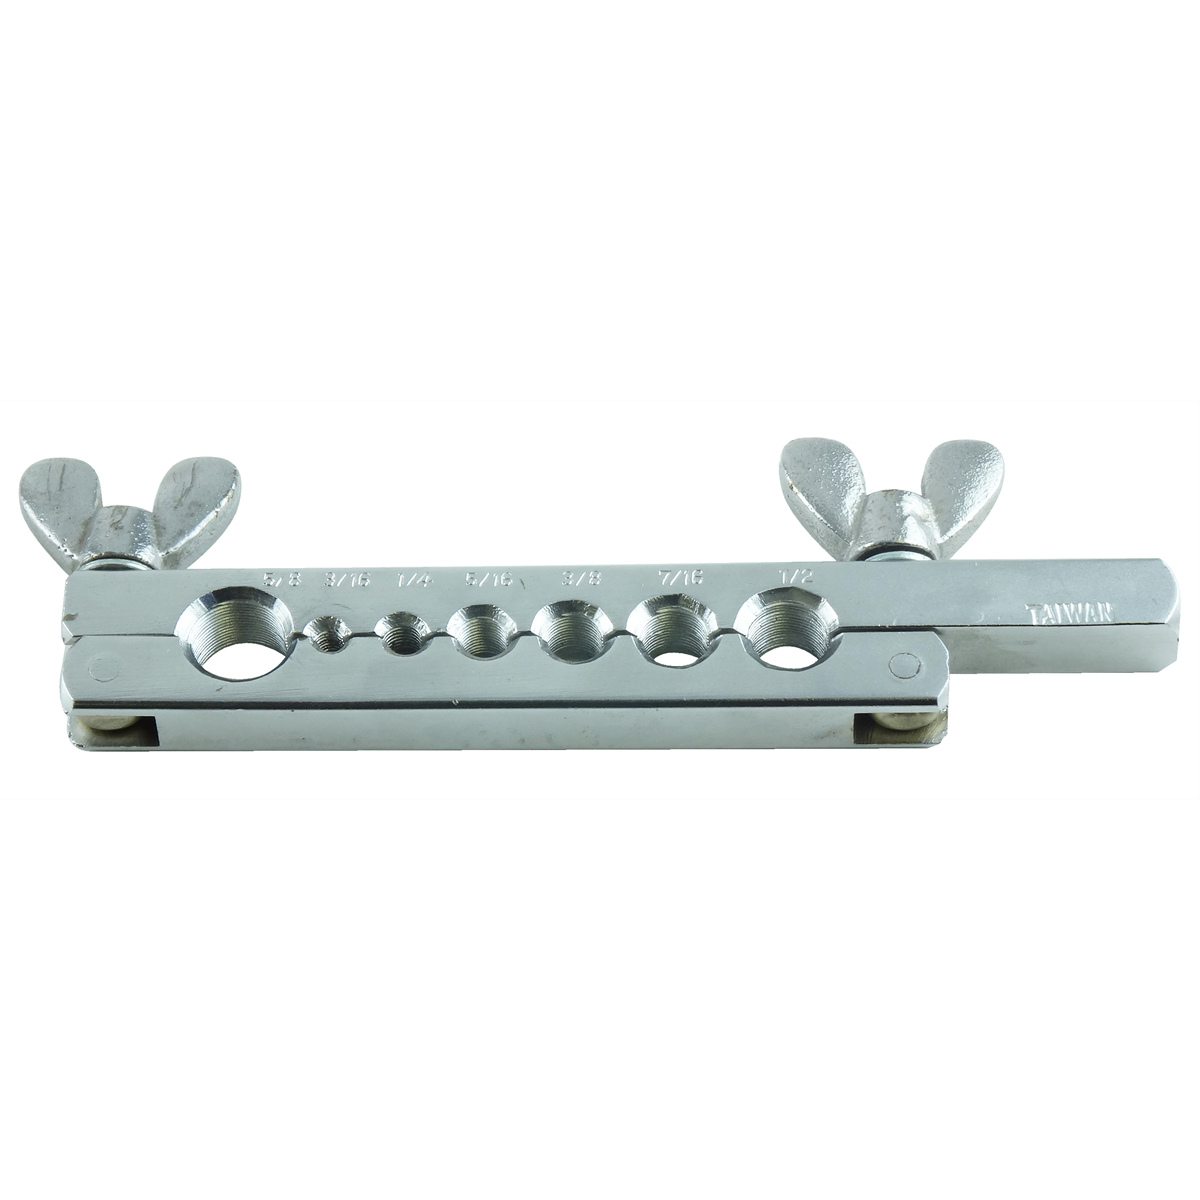 SIZING CLAMP FOR KTI-70060